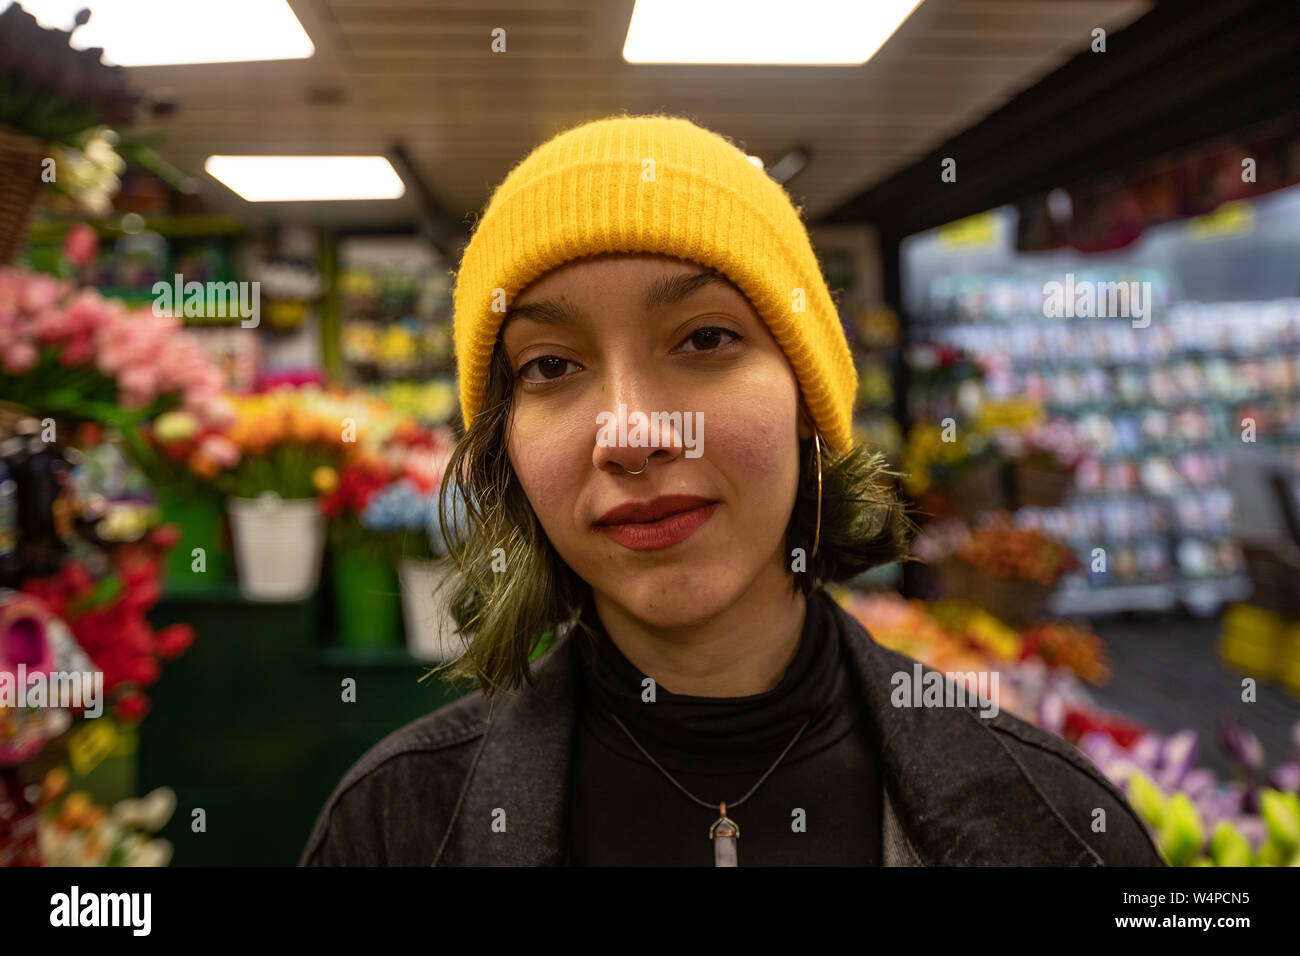 Portrait of young woman in yellow hat standing in florist. Stock Photo